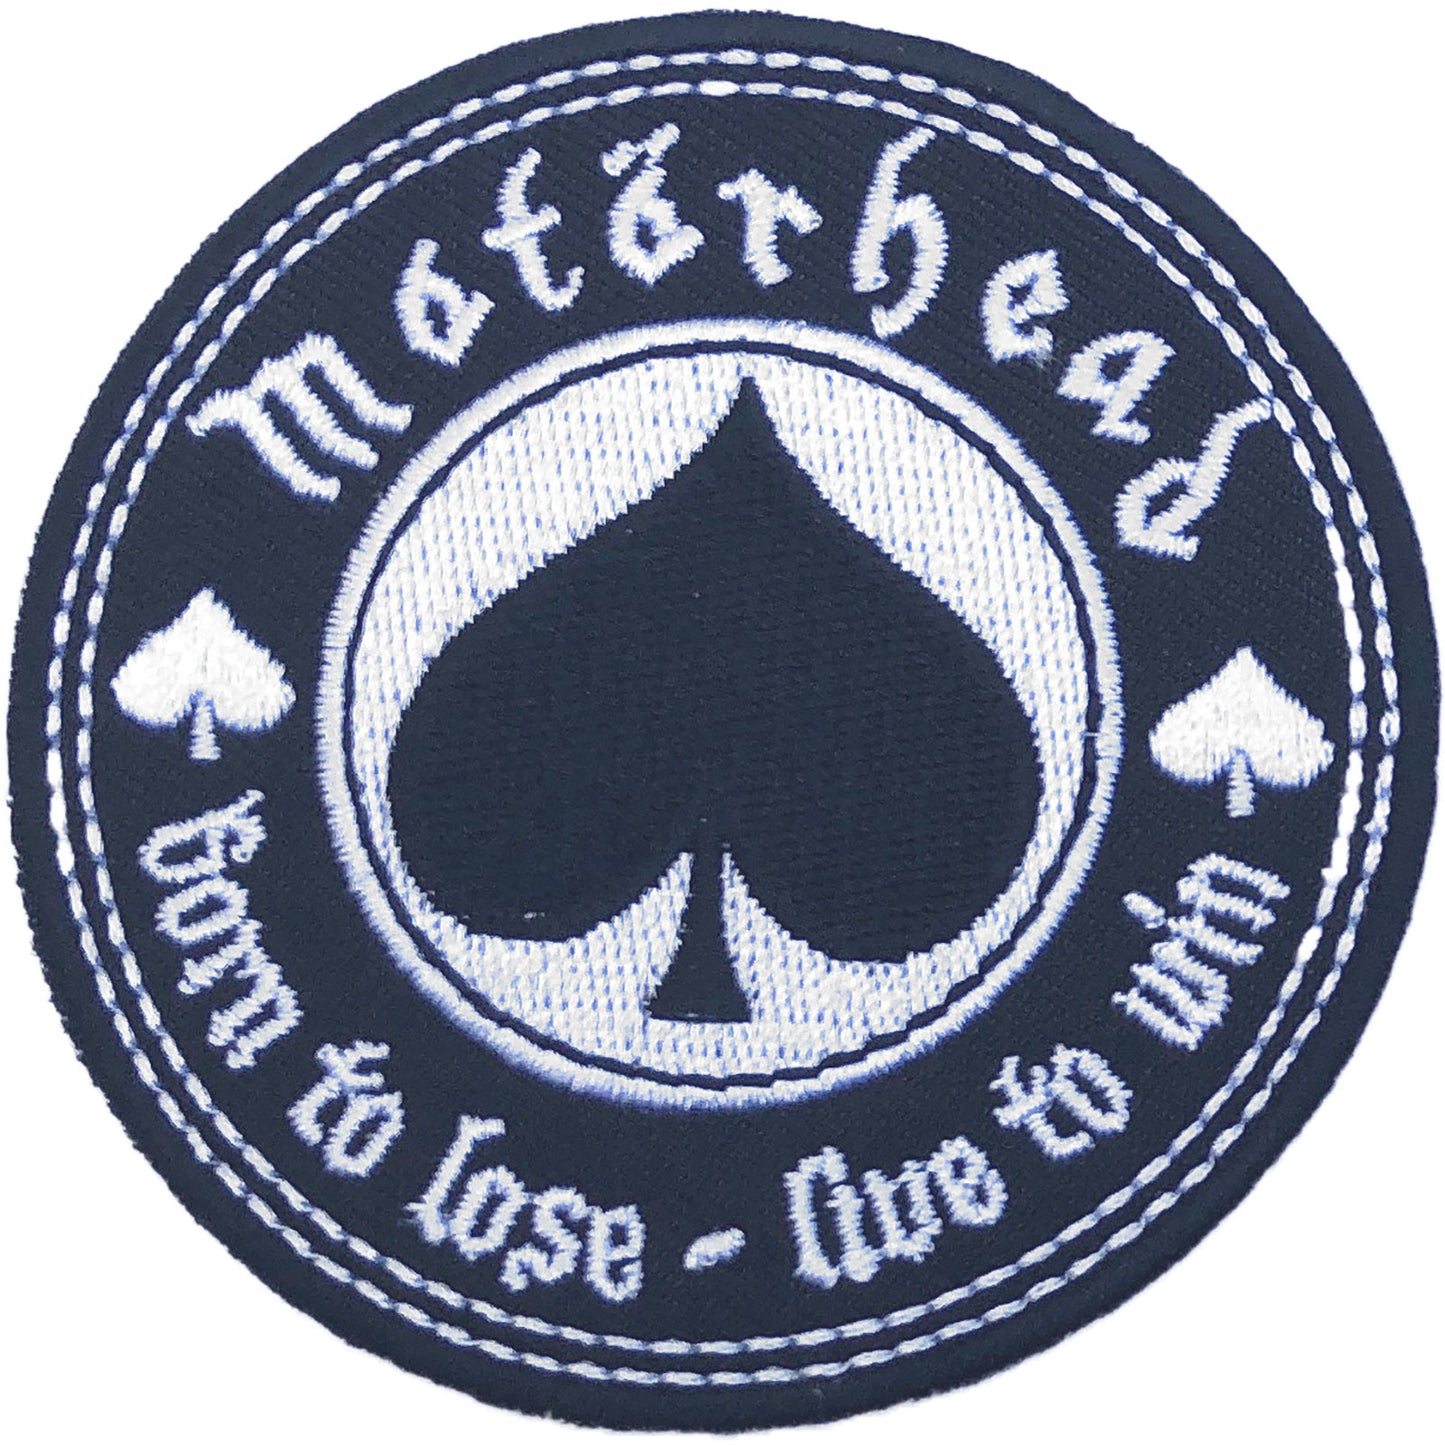 MOTORHEAD STANDARD PATCH: BORN TO LOVE, LIVE TO WIN